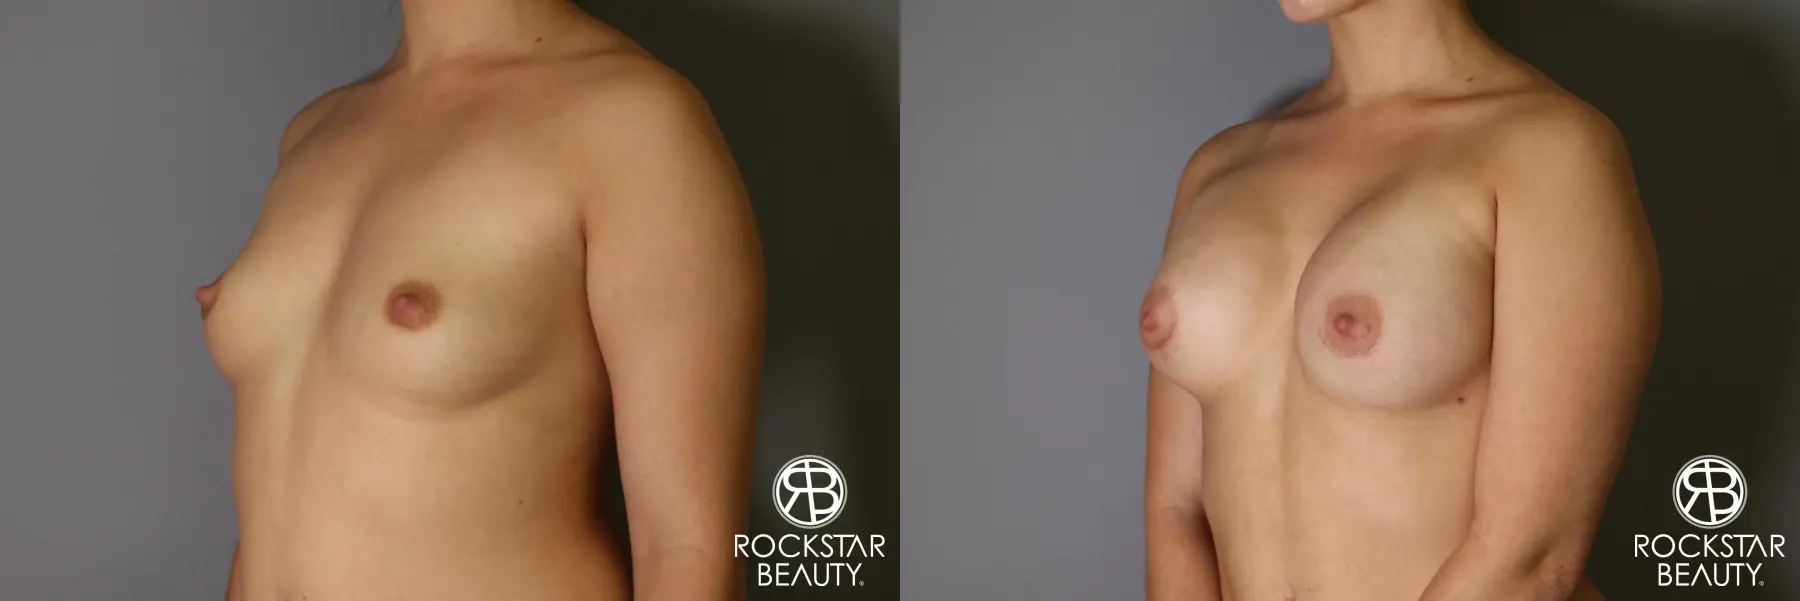 Breast Augmentation: Patient 16 - Before and After 2